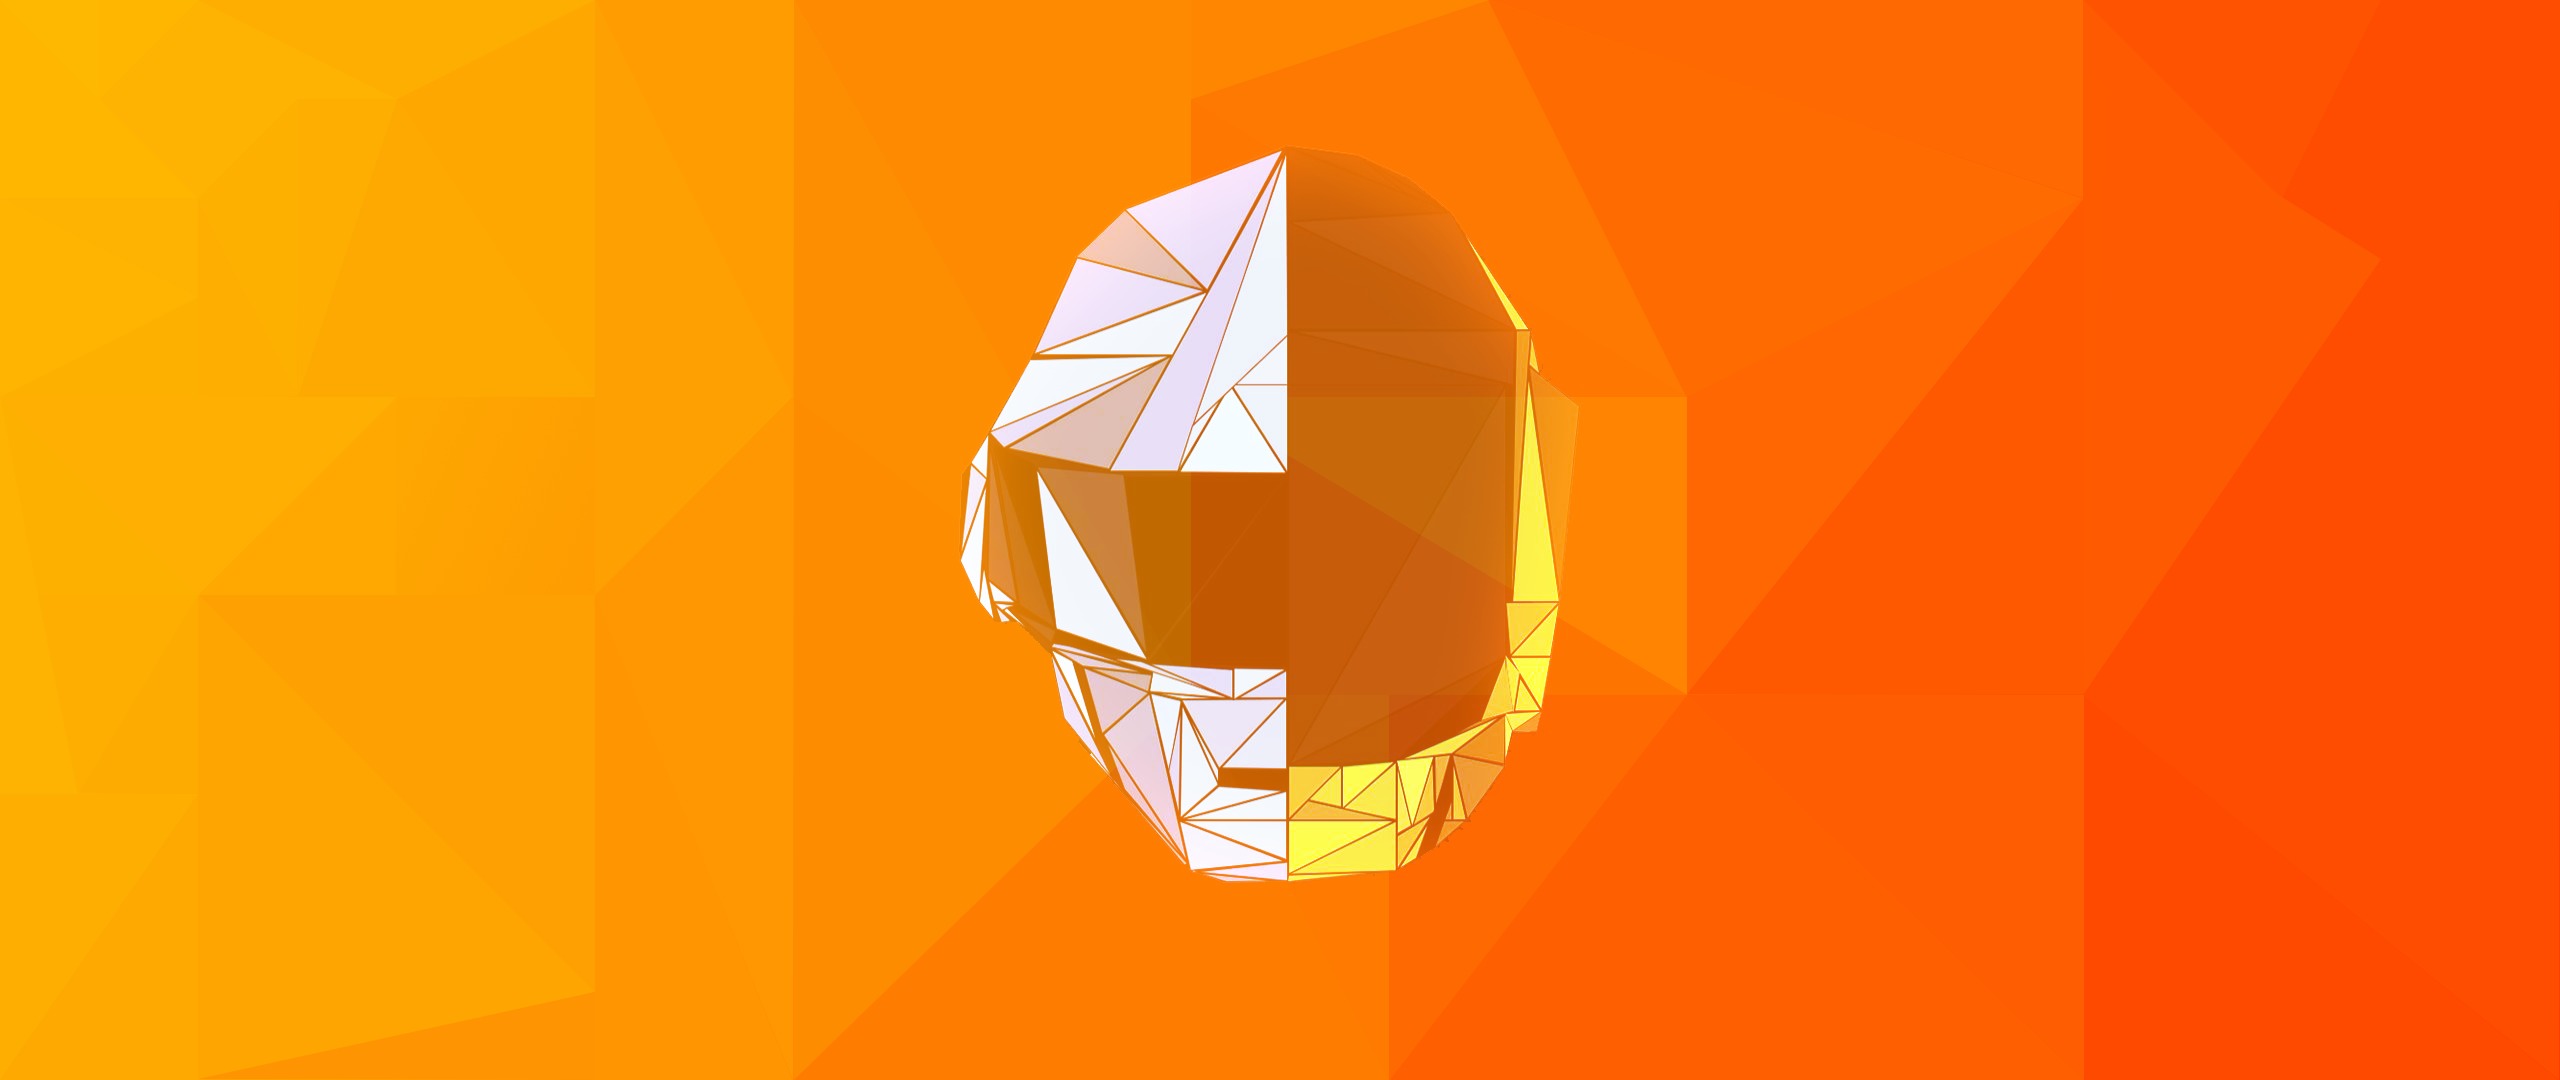 1920x1080 Low Poly Daft Punk 1080p Laptop Full Hd Wallpaper Hd Abstract 4k Wallpapers Images Photos And Background